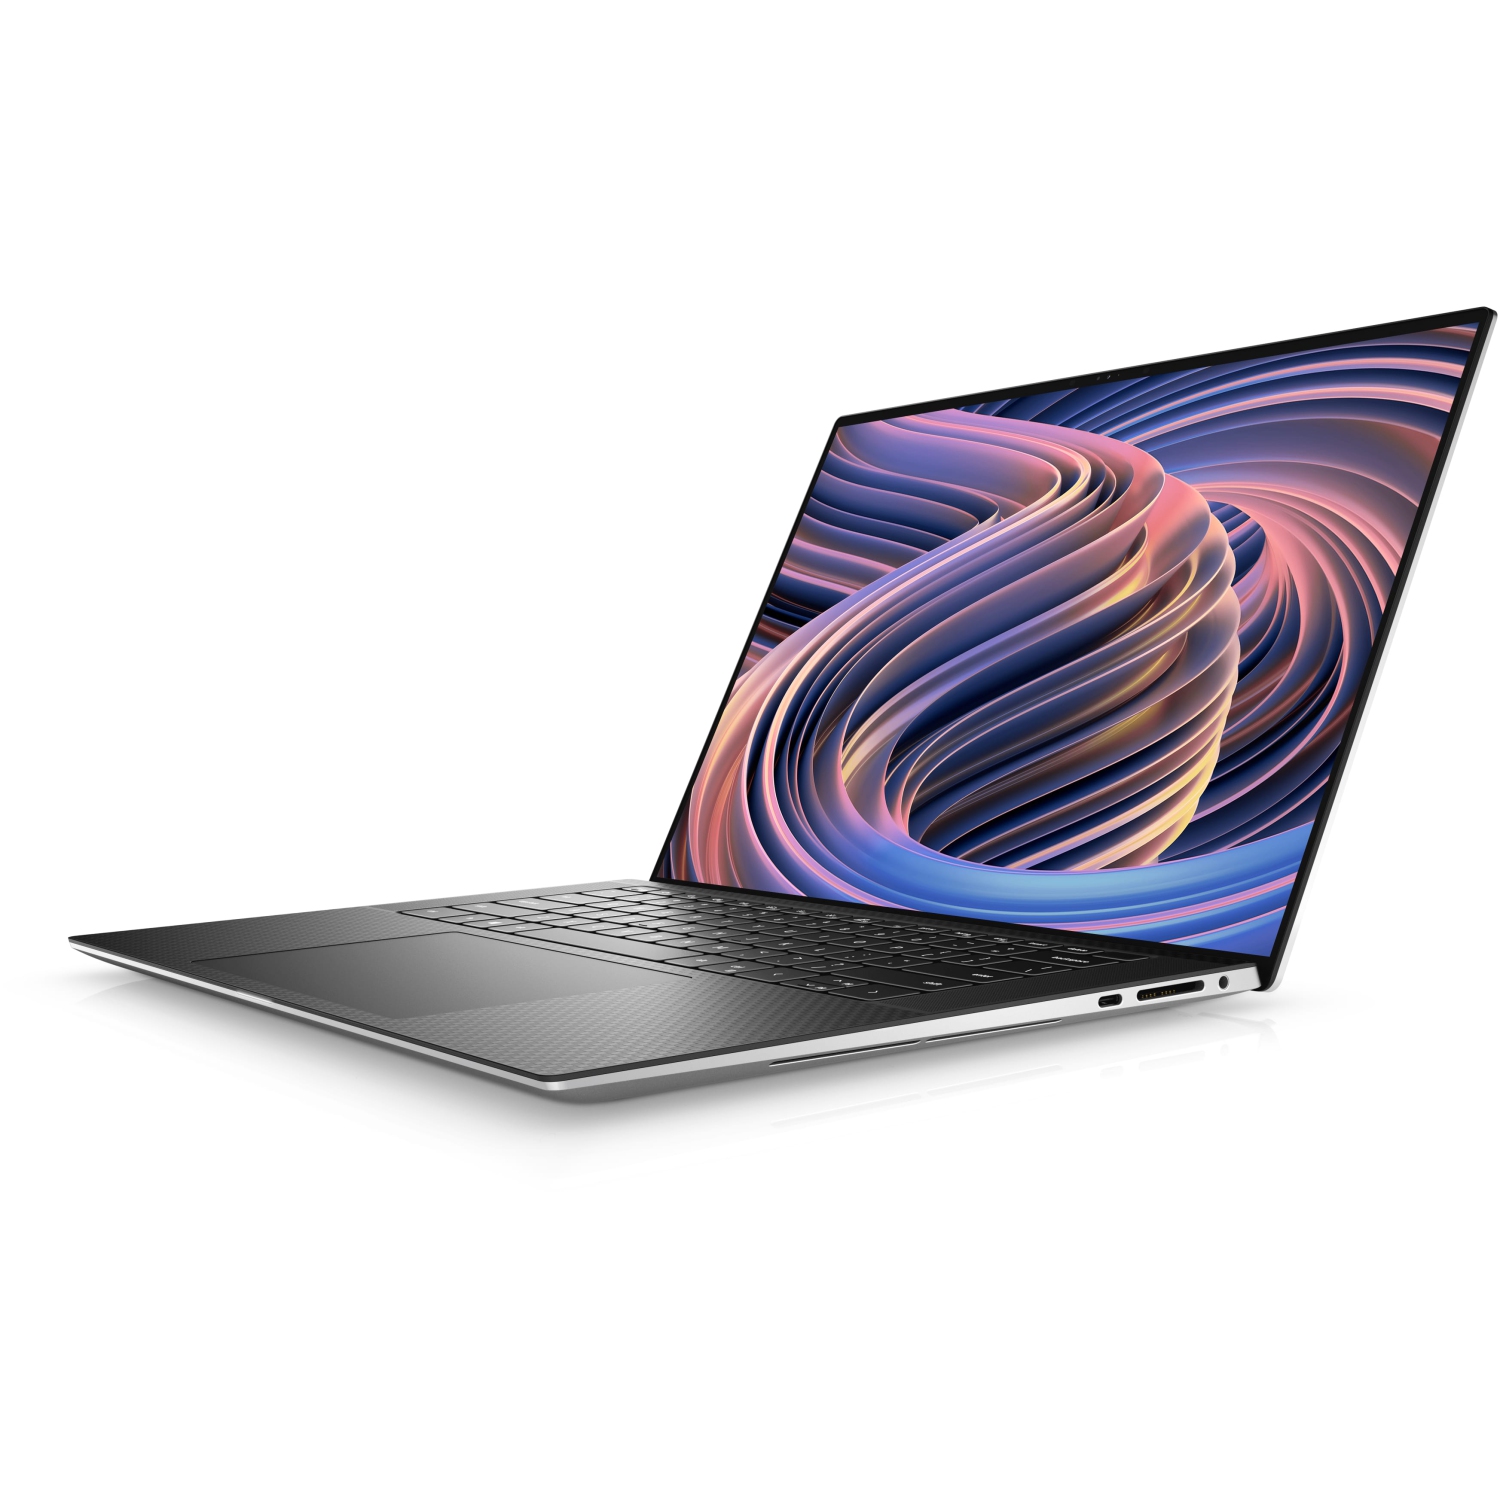 Dell XPS 9520 Laptop (2022) | 15.6" FHD+ | Core i7 - 512GB SSD - 16GB RAM - RTX 3050 | 14 Cores @ 4.7 GHz - 12th Gen CPU